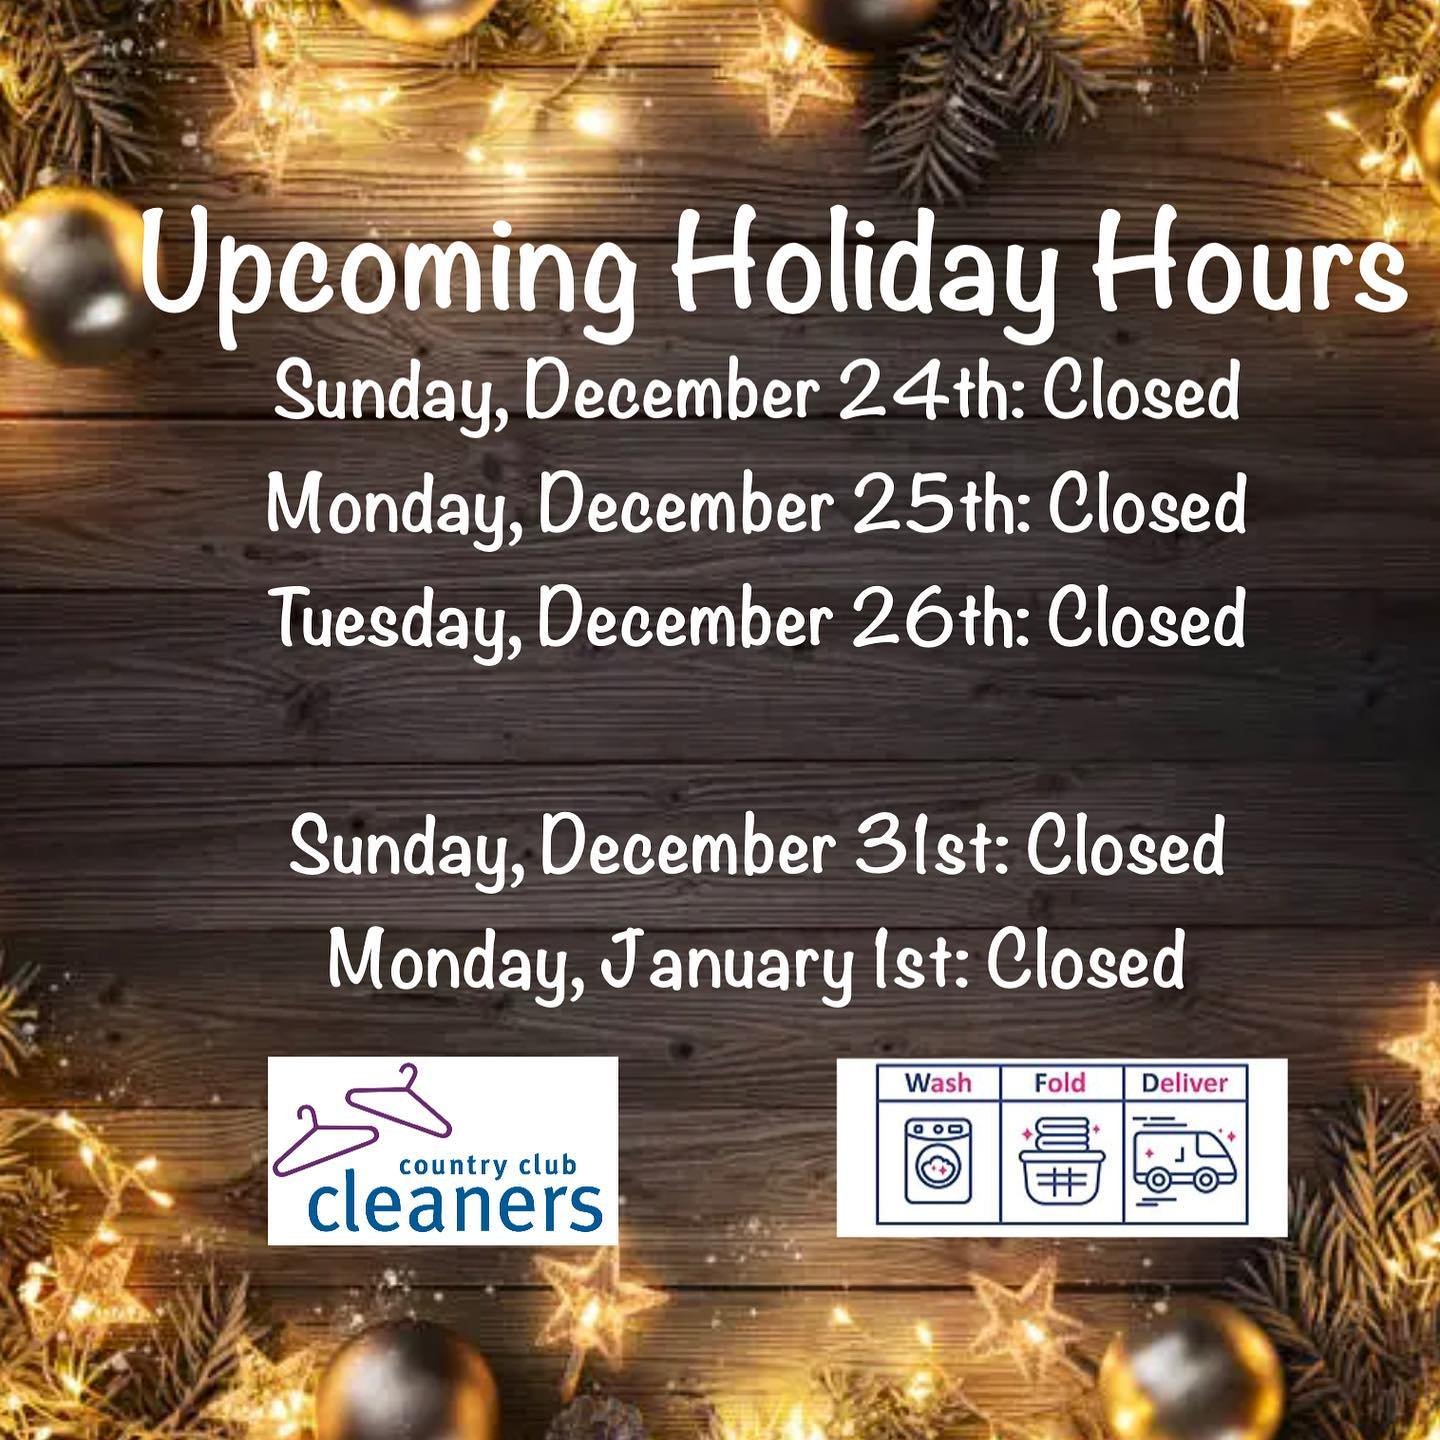 Happy Holidays! We will be closed Sunday through Tuesday for Christmas. Stores are back open on Wednesday and route service will resume! 

We are closed Sunday-Monday for New Years and will be back open on Tuesday for regular store hours and route se